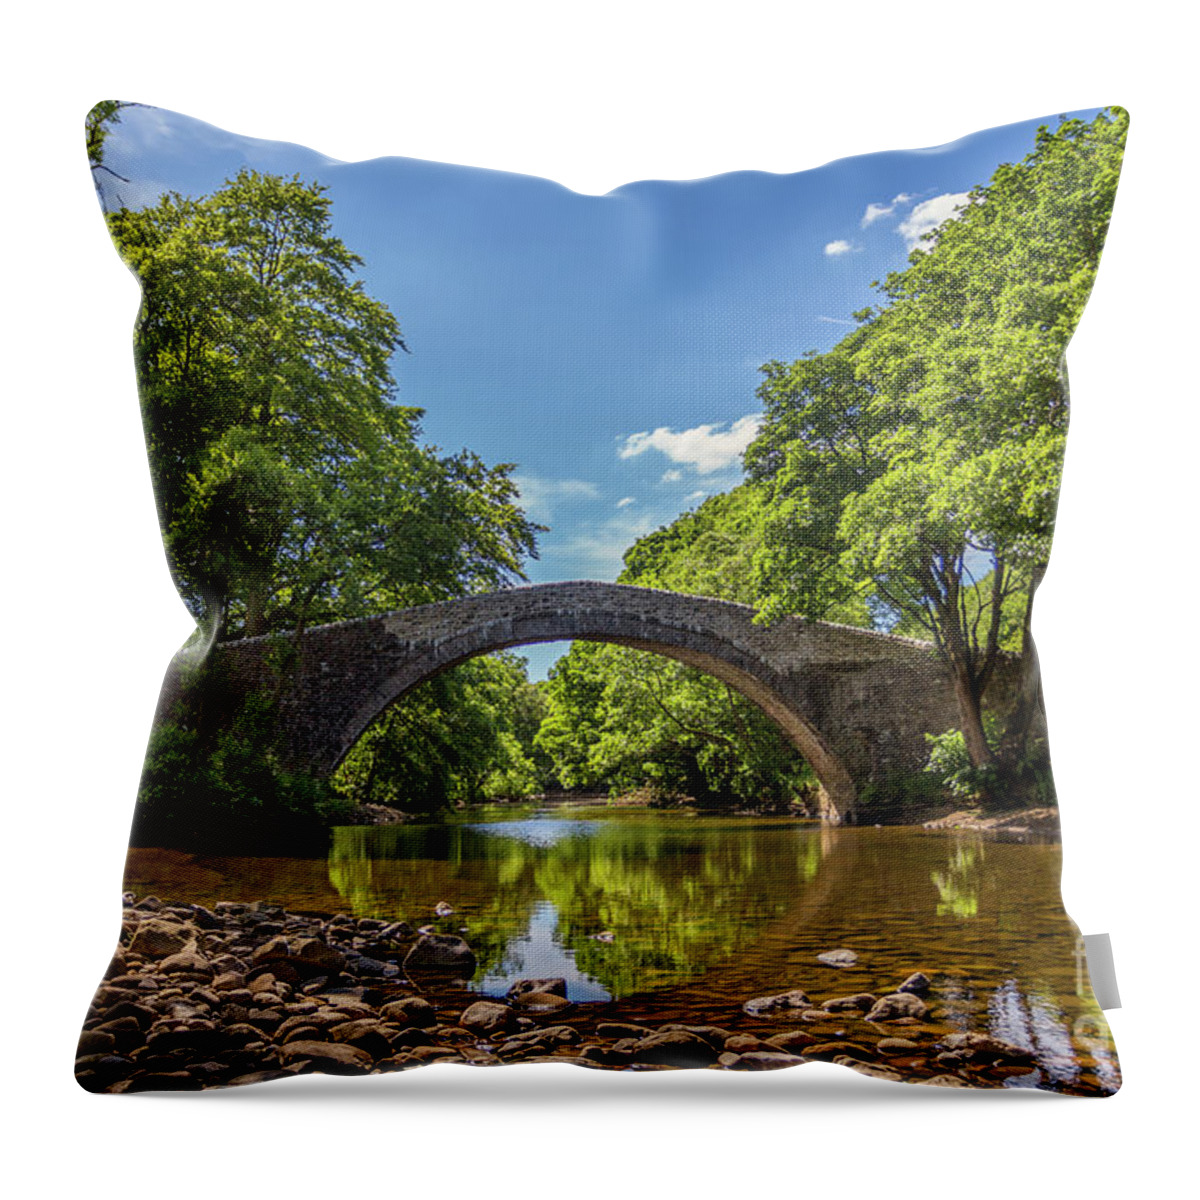 Uk Throw Pillow featuring the photograph Ivelet Bridge, Swaledale by Tom Holmes Photography